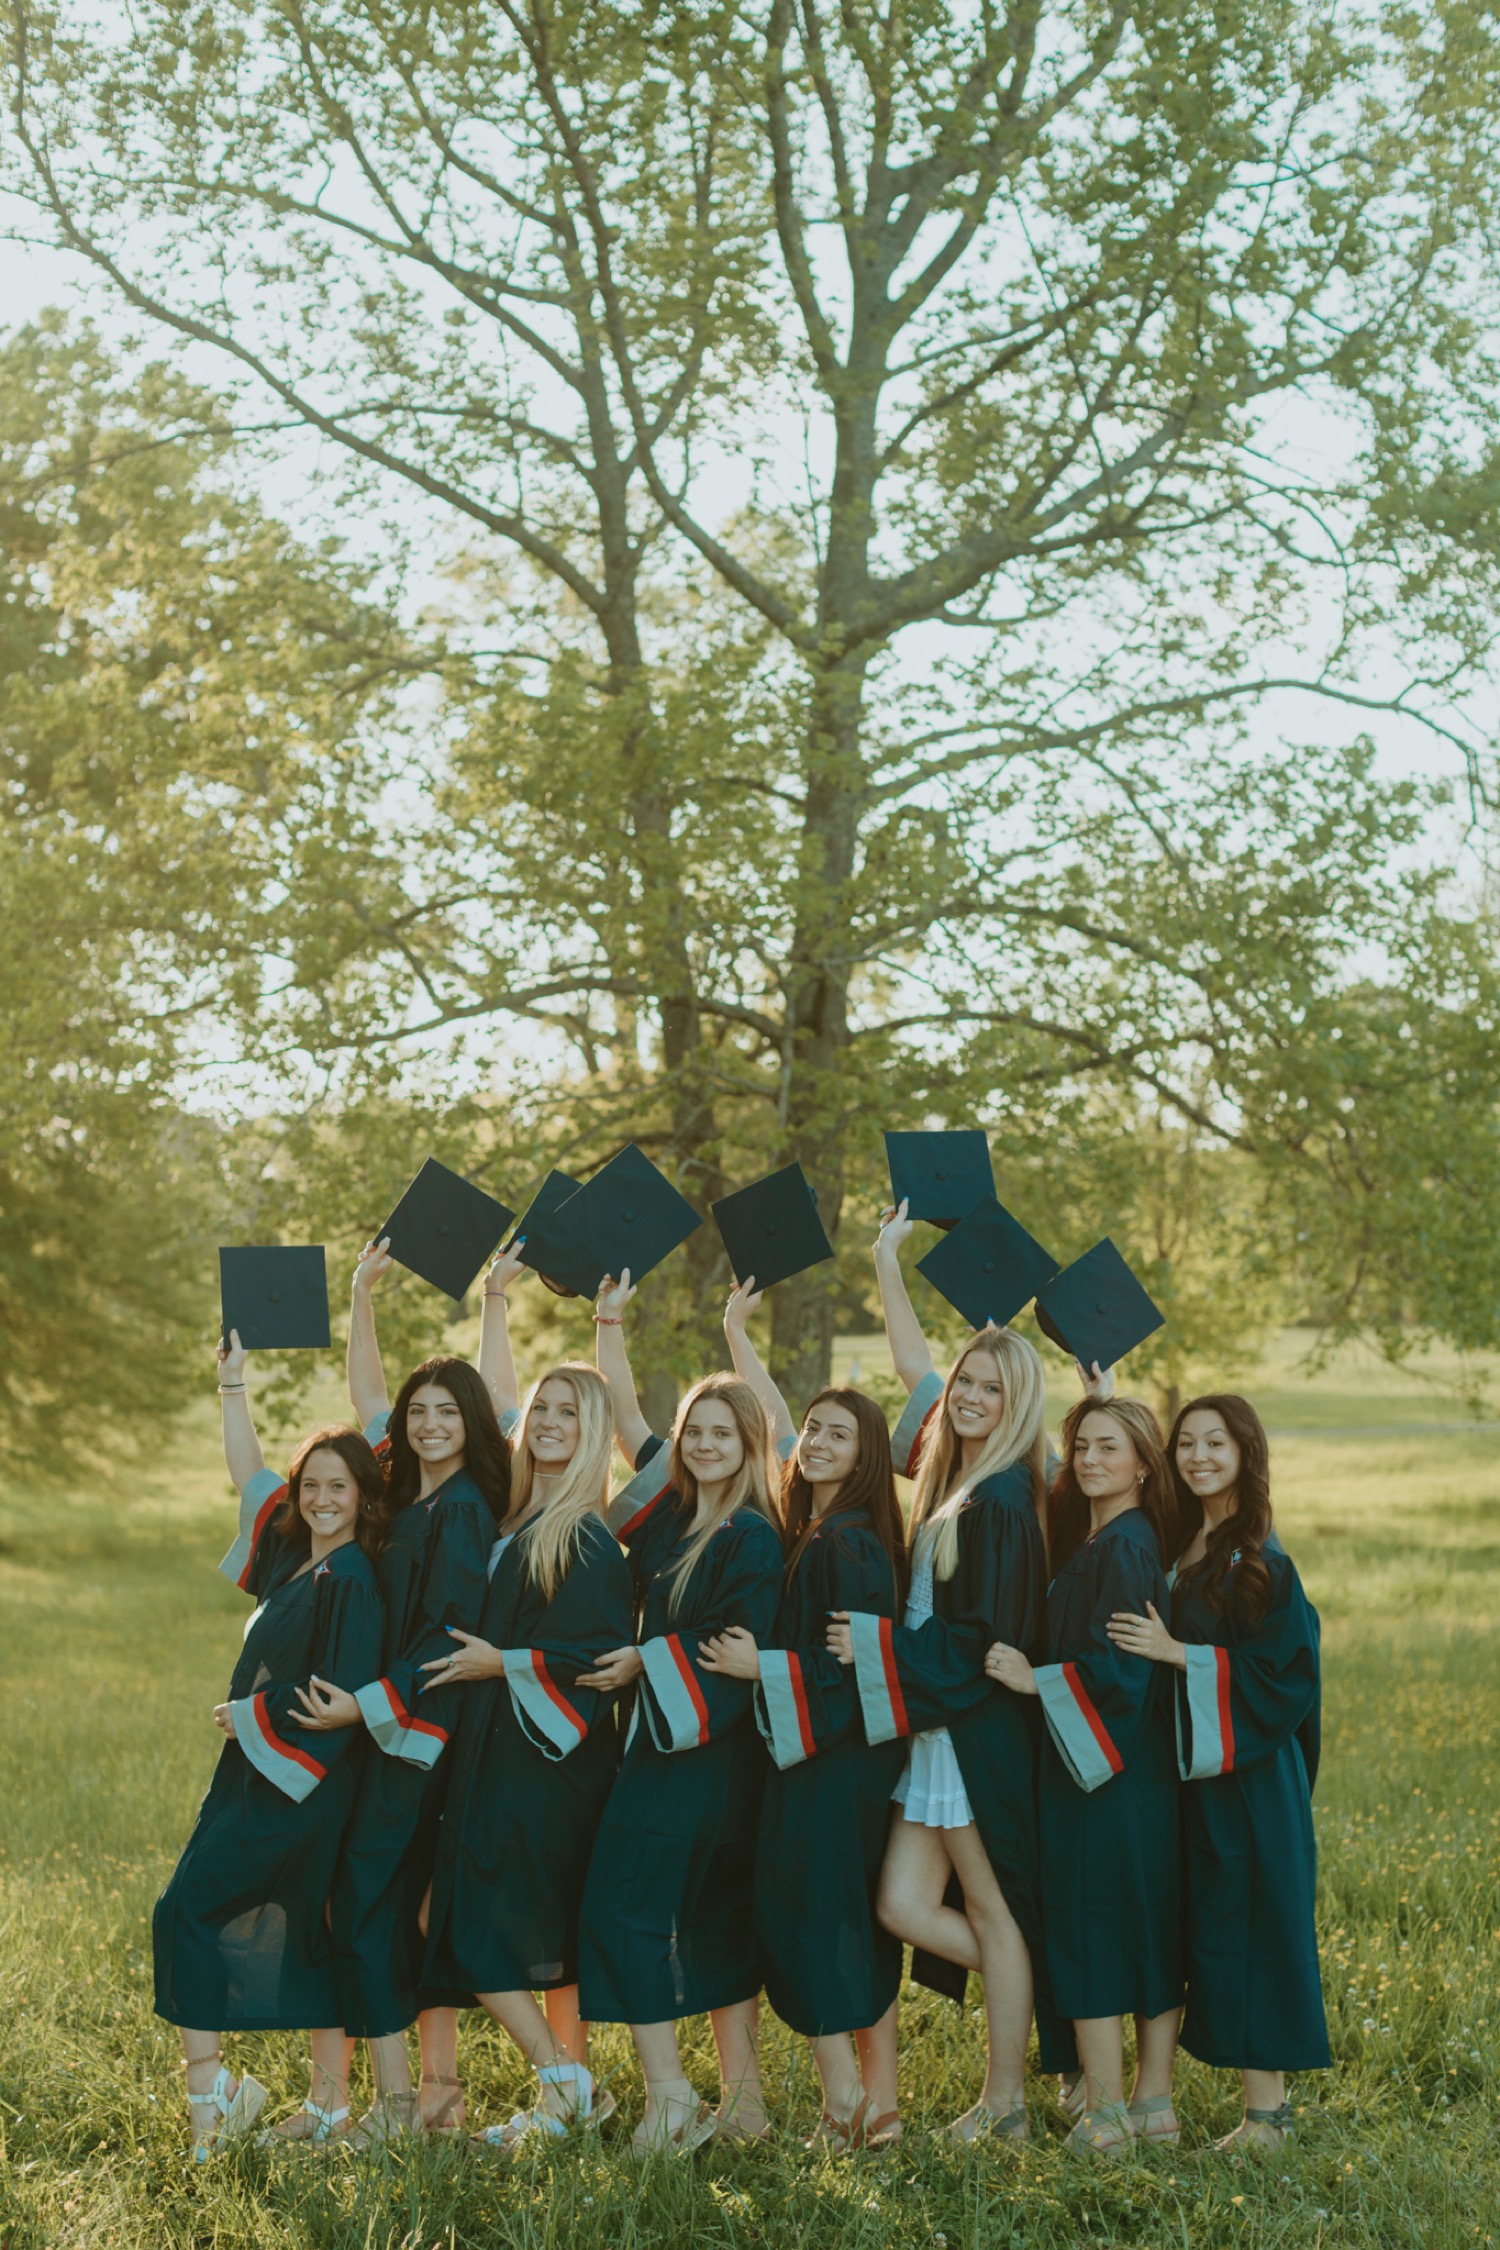 Gallery | rachelerb | Graduation picture poses, Graduation photography poses,  Girl graduation pictures